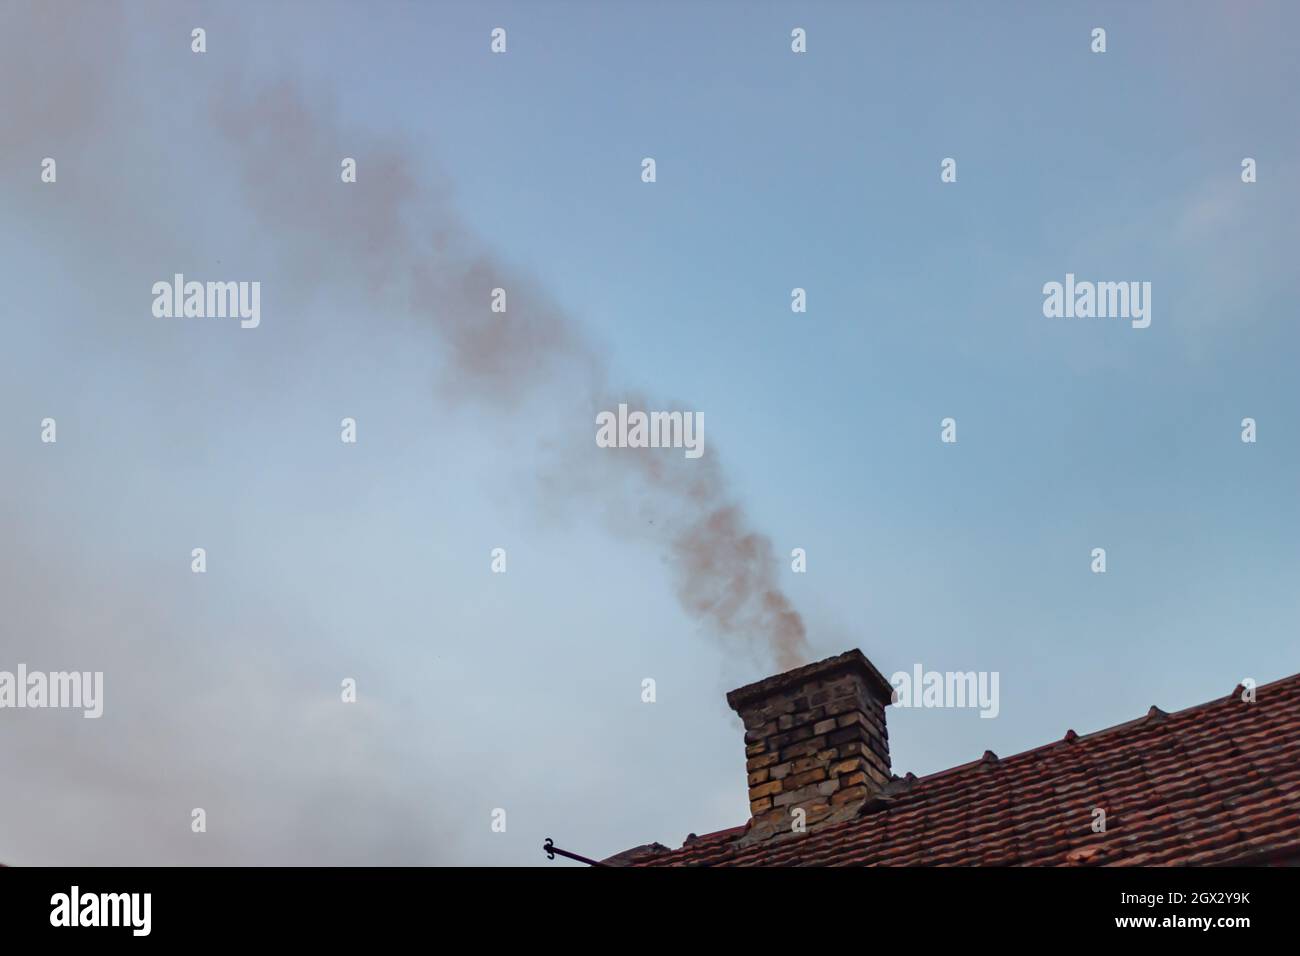 Smoke coming out of the chimney on the roof Stock Photo